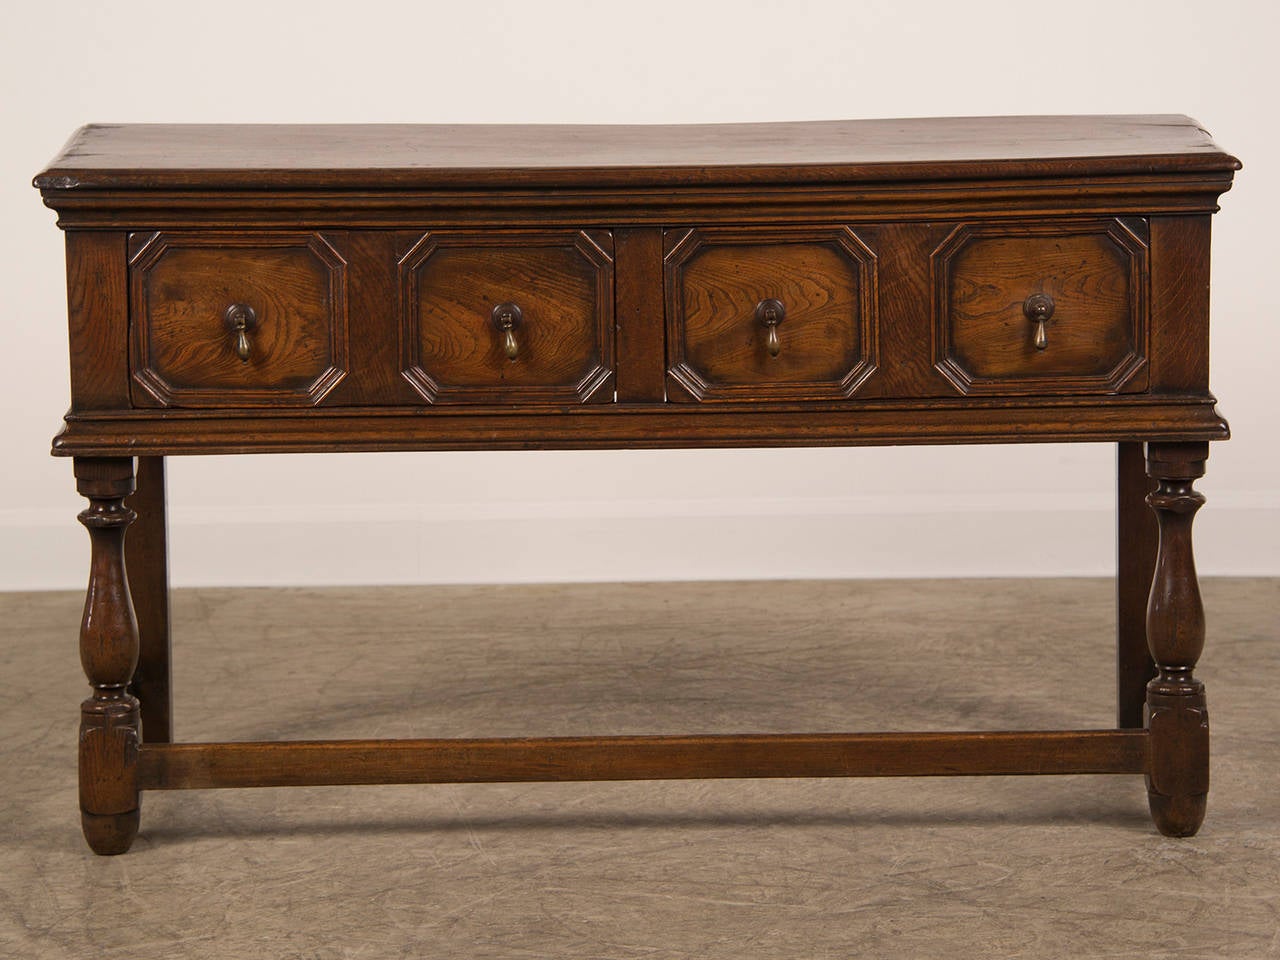 A Jacobean Revival oak serving table from England c. 1885 having two drawers. Please notice the strong geometric quality of the symmetrical drawer fronts to this piece. Each octagon is framed by a deep moulding and is centred on a brass drop pull.